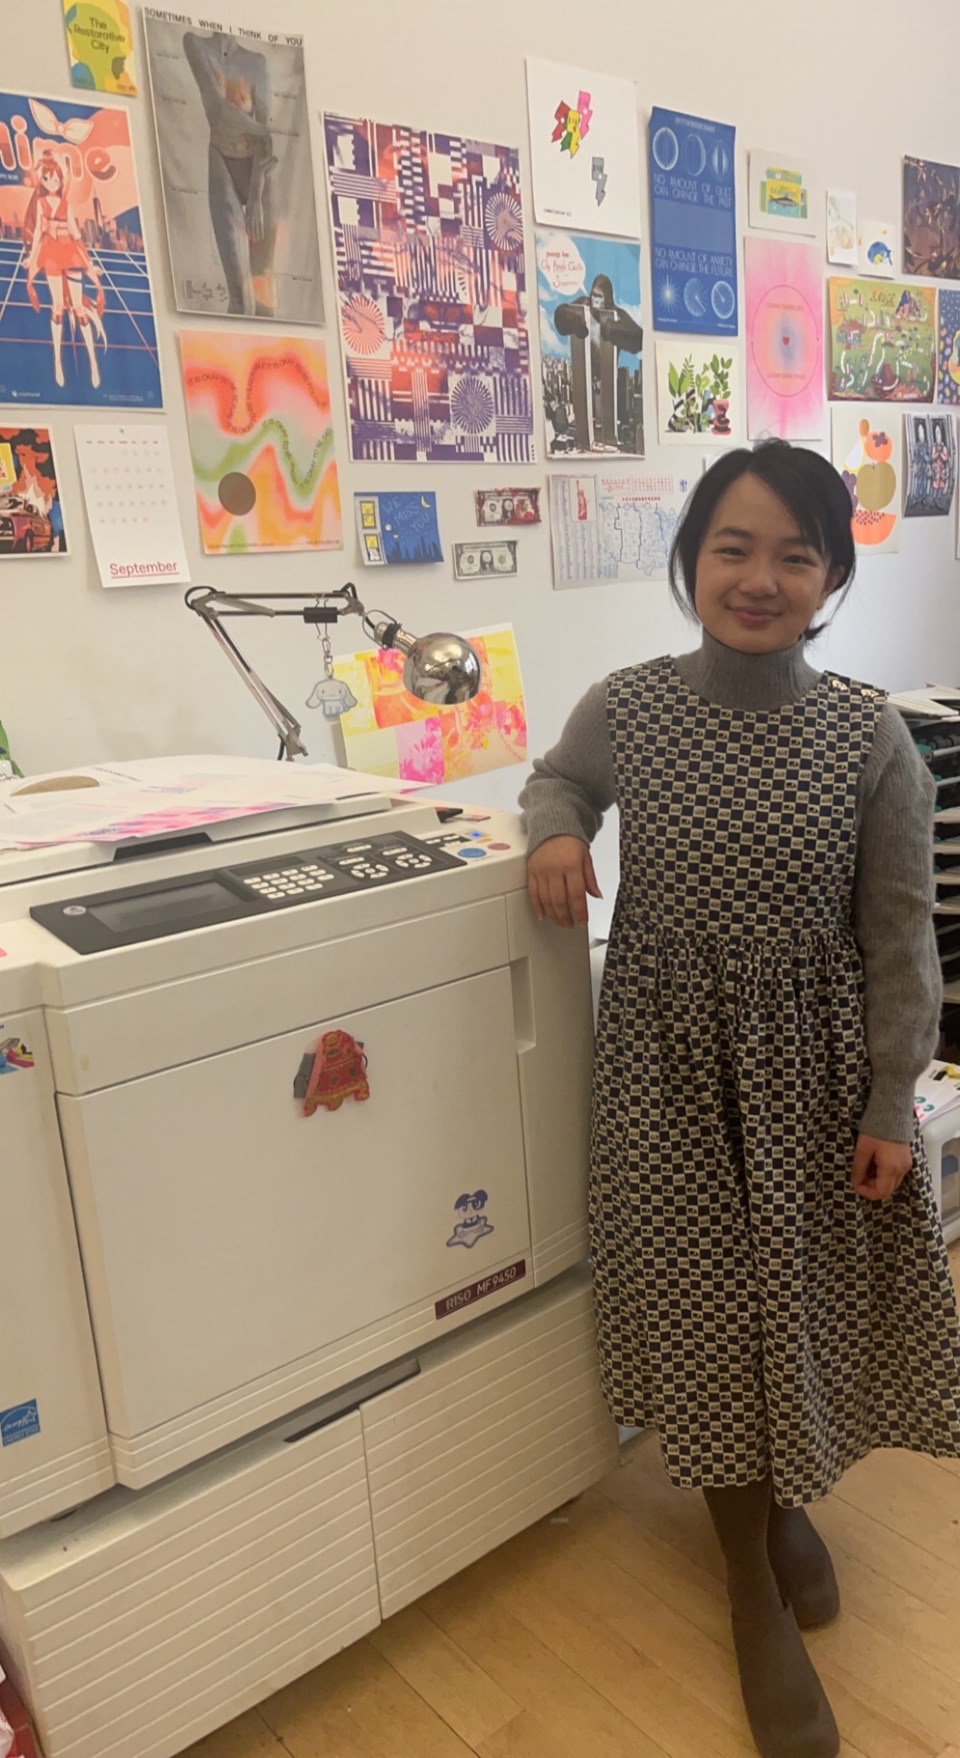 Amanda Chung and the Riso machine, a blend of old and new printmaking tech.
Photo: Natasha Knows for BK Reader.